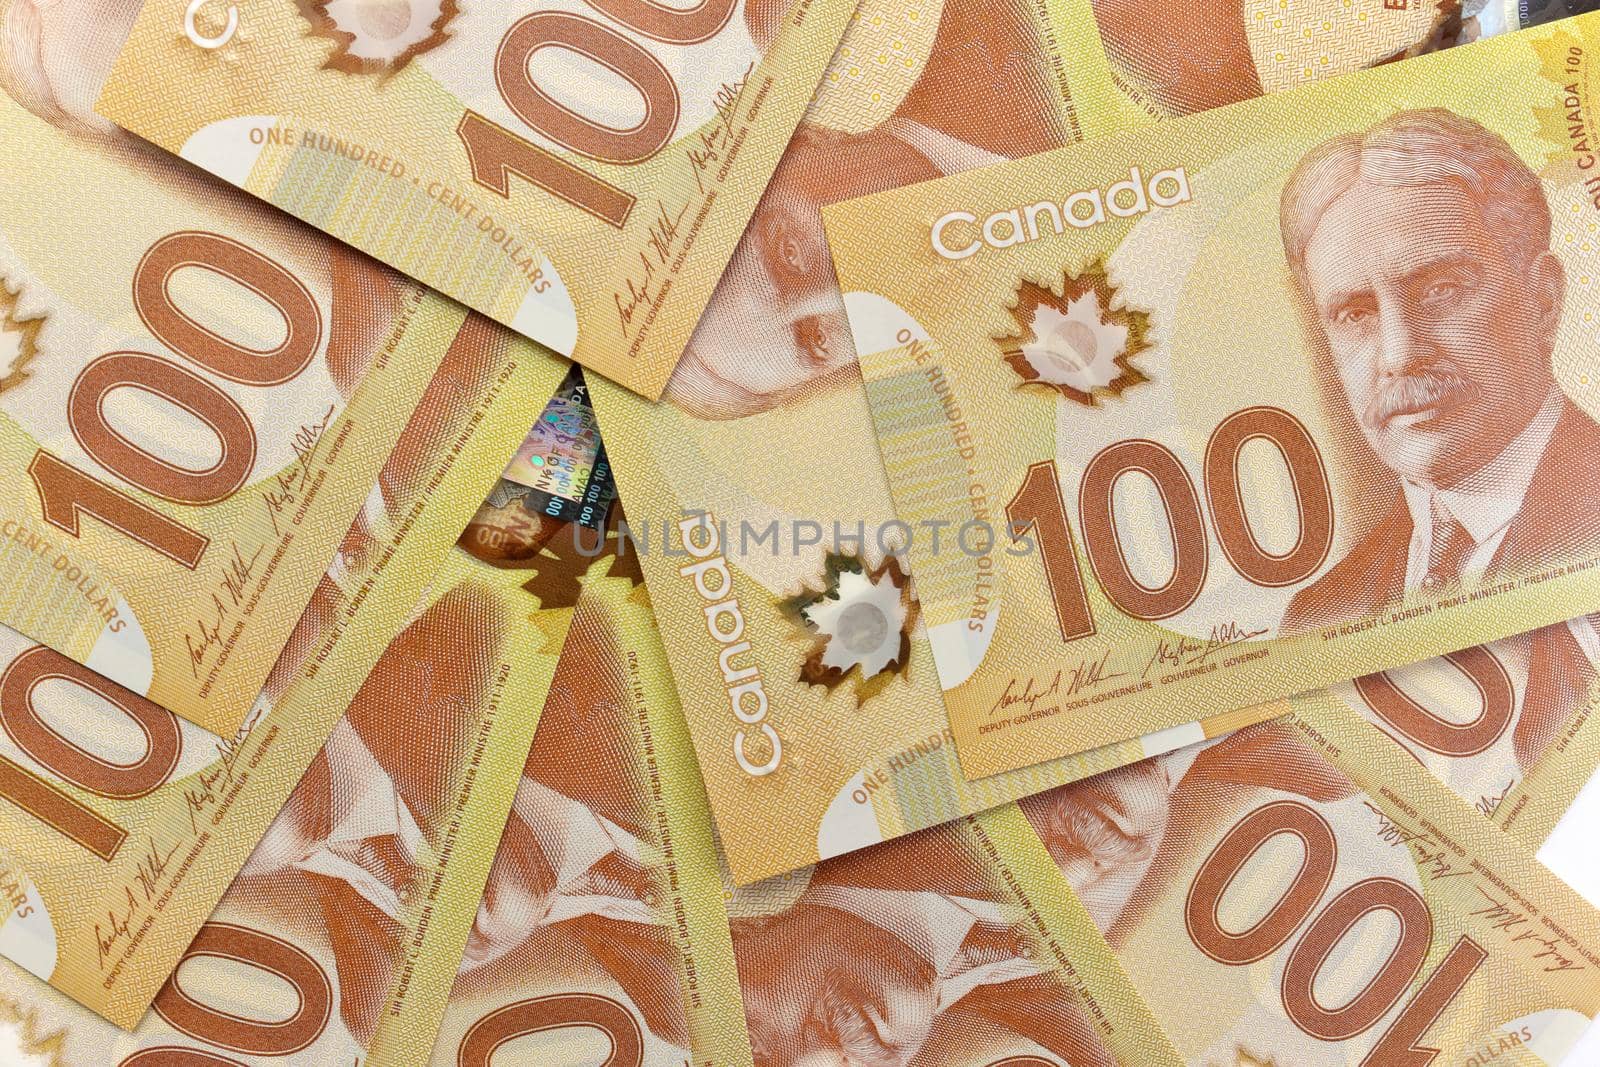 Directly Above Image of Crisp Canadian 100 One Hundred Dollar Bills on a White Background by markvandam